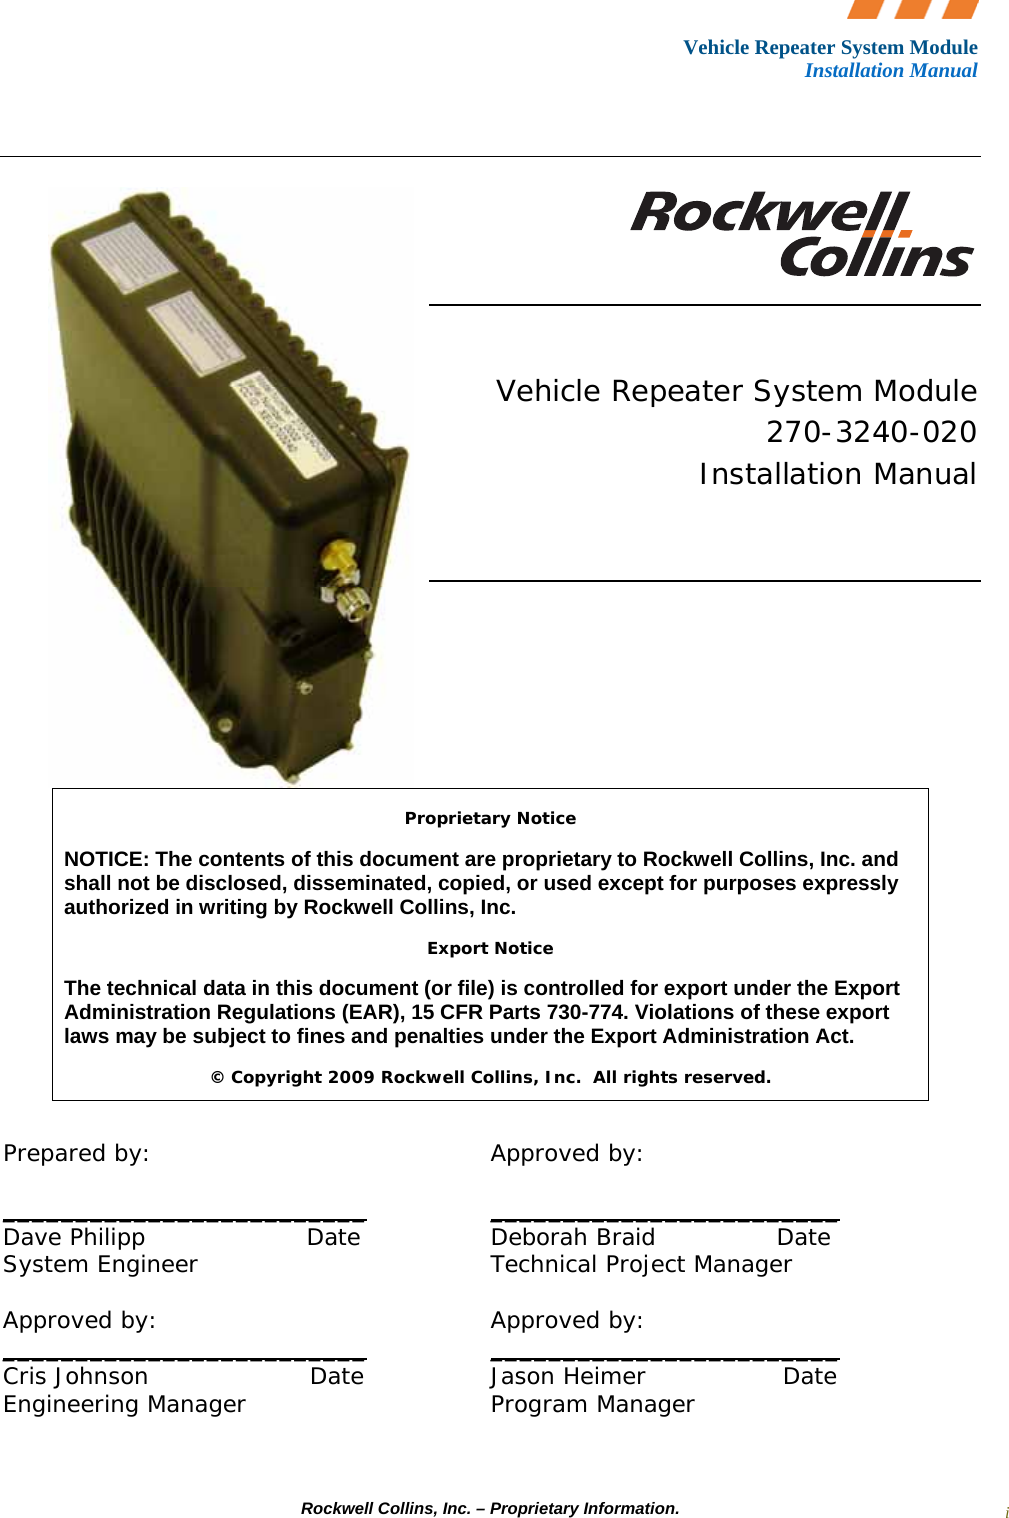 Vehicle Repeater System Module Installation Manual     Rockwell Collins, Inc. – Proprietary Information. i       Vehicle Repeater System Module 270-3240-020 Installation Manual         Proprietary Notice NOTICE: The contents of this document are proprietary to Rockwell Collins, Inc. and shall not be disclosed, disseminated, copied, or used except for purposes expressly authorized in writing by Rockwell Collins, Inc. Export Notice The technical data in this document (or file) is controlled for export under the Export Administration Regulations (EAR), 15 CFR Parts 730-774. Violations of these export laws may be subject to fines and penalties under the Export Administration Act. © Copyright 2009 Rockwell Collins, Inc.  All rights reserved.  Prepared by:   Approved by:  _________________________  ________________________ Dave Philipp                    Date    Deborah Braid               Date System Engineer    Technical Project Manager  Approved by:    Approved by:   _________________________              ________________________ Cris Johnson                    Date    Jason Heimer                 Date Engineering Manager    Program Manager 